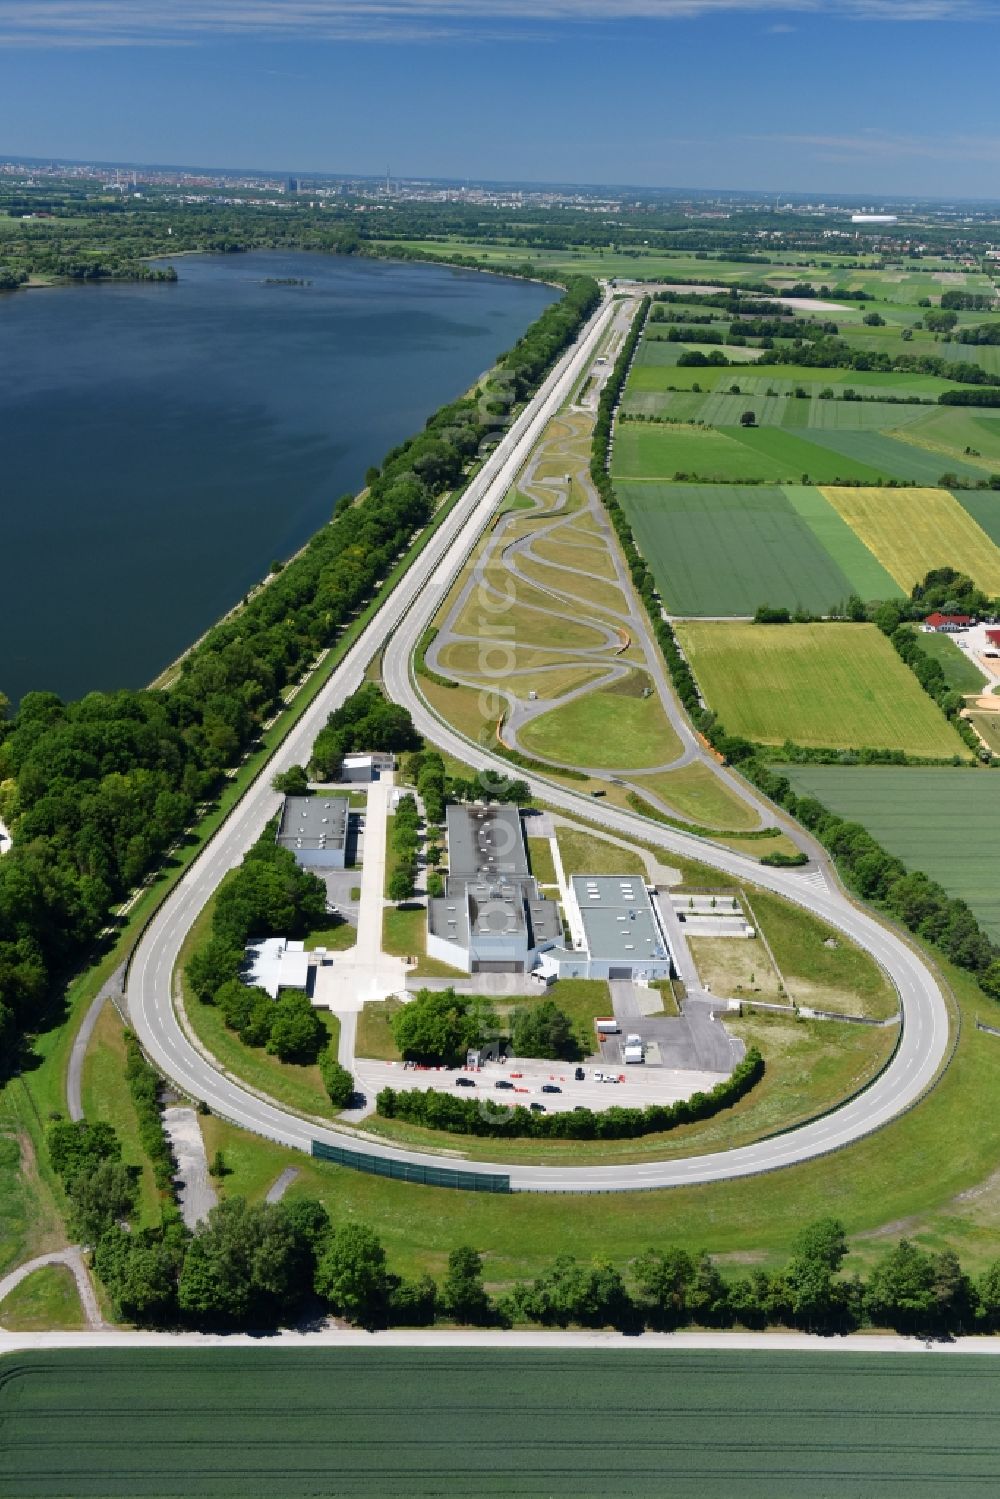 Aerial image Aschheim - Test track and practise place on the BMW measuring area Aschheim in the district of Neufinsing in Aschheim in the federal state Bavaria, Germany